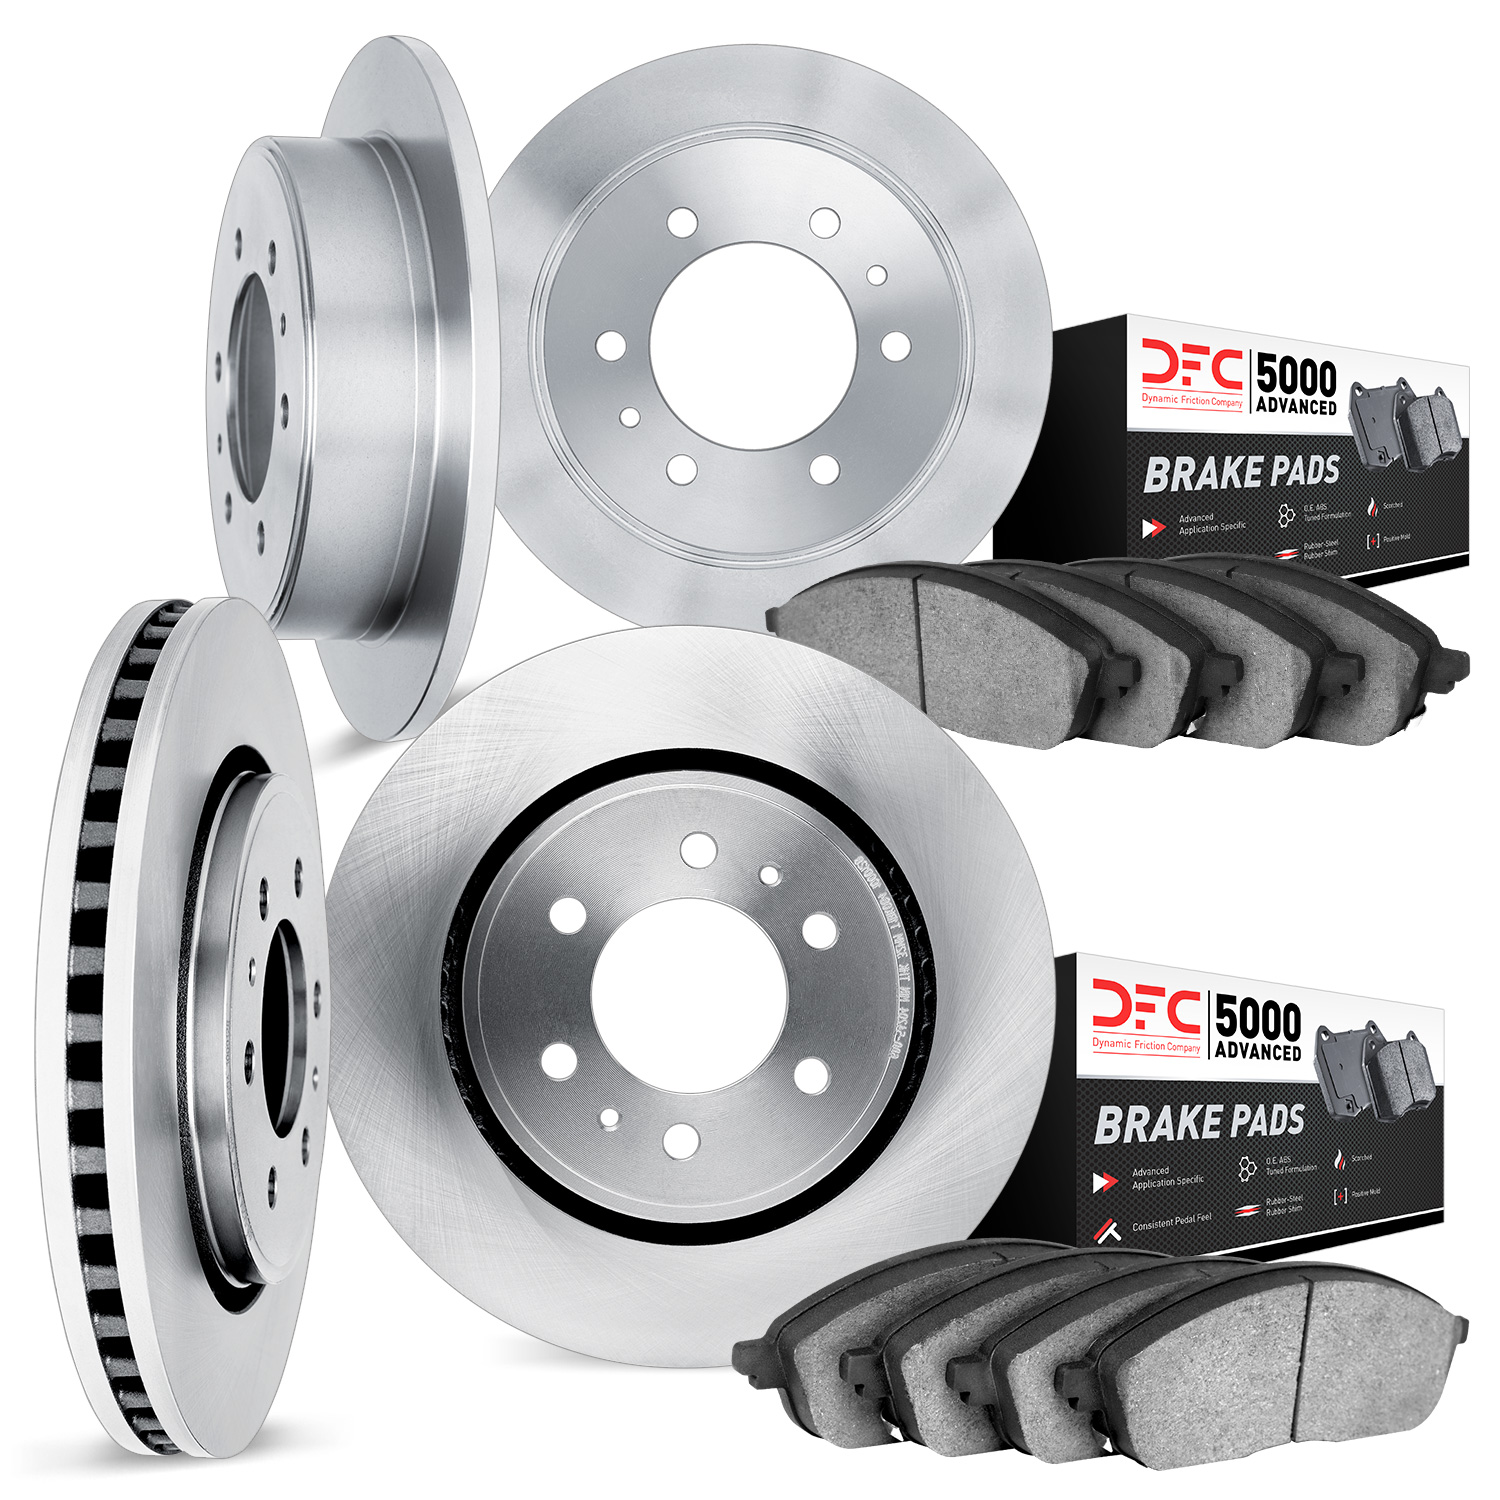 6504-49001 Brake Rotors w/5000 Advanced Brake Pads Kit, 2011-2012 VPG, Position: Front and Rear